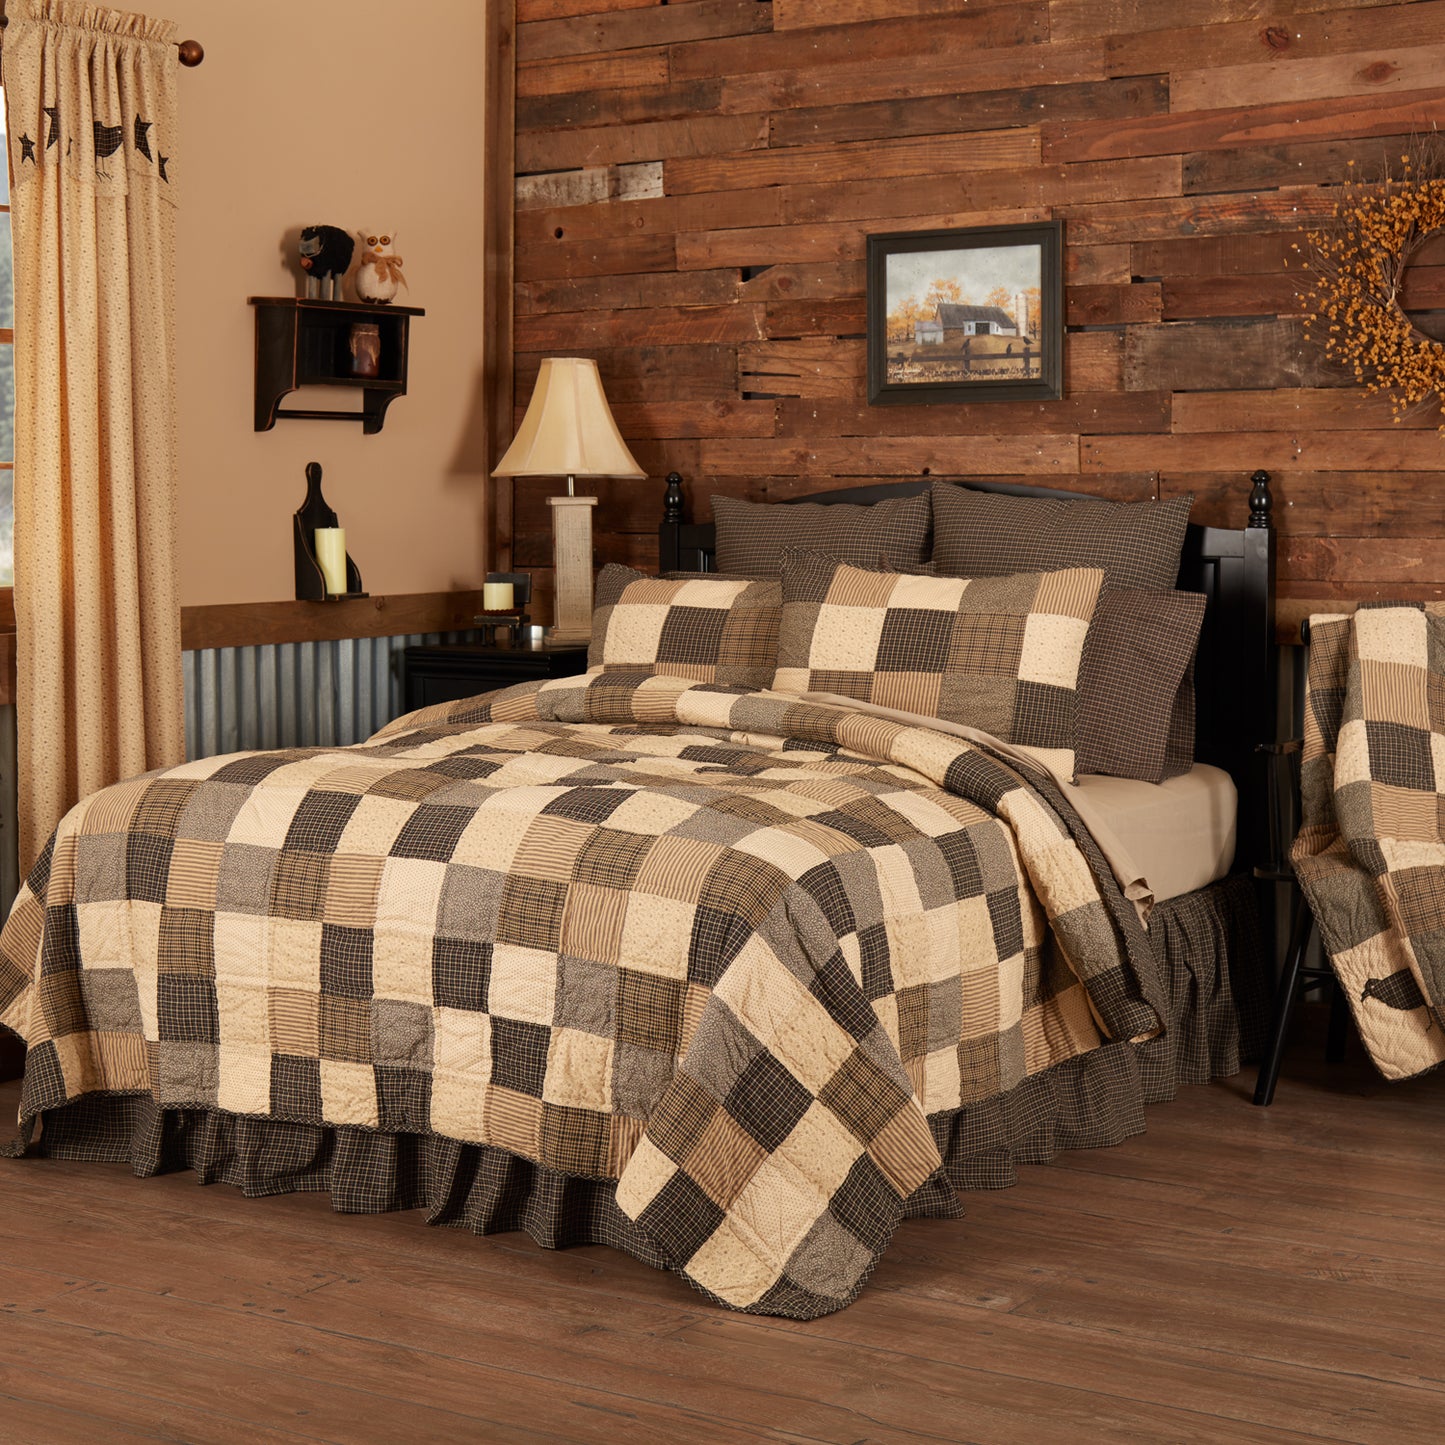 10173-Kettle-Grove-Twin-Quilt-70Wx90L-image-3